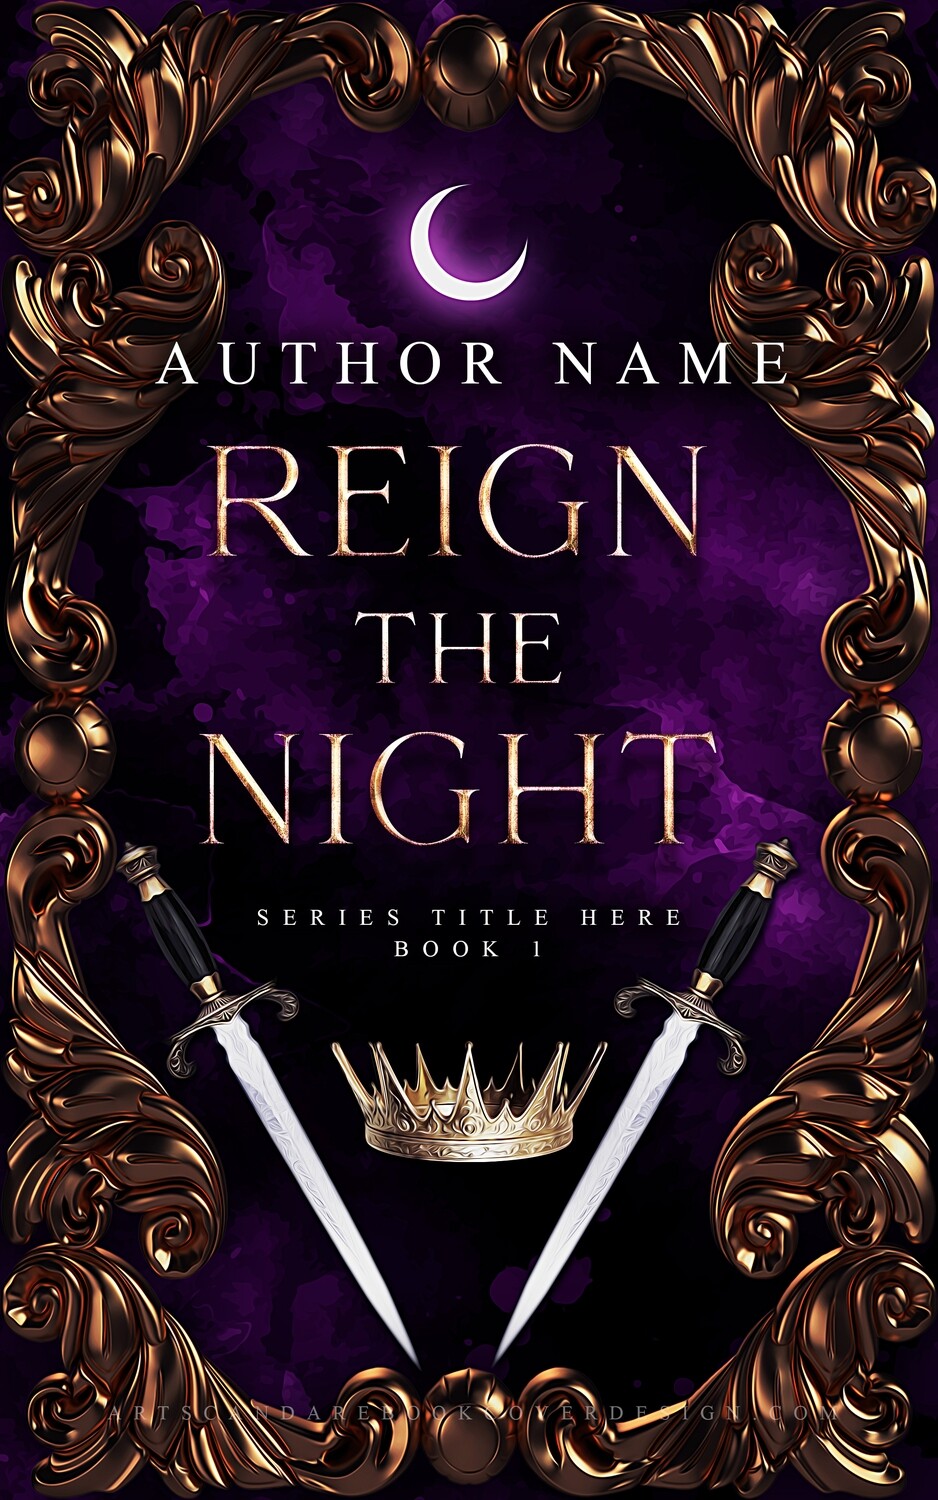 REIGN THE NIGHT